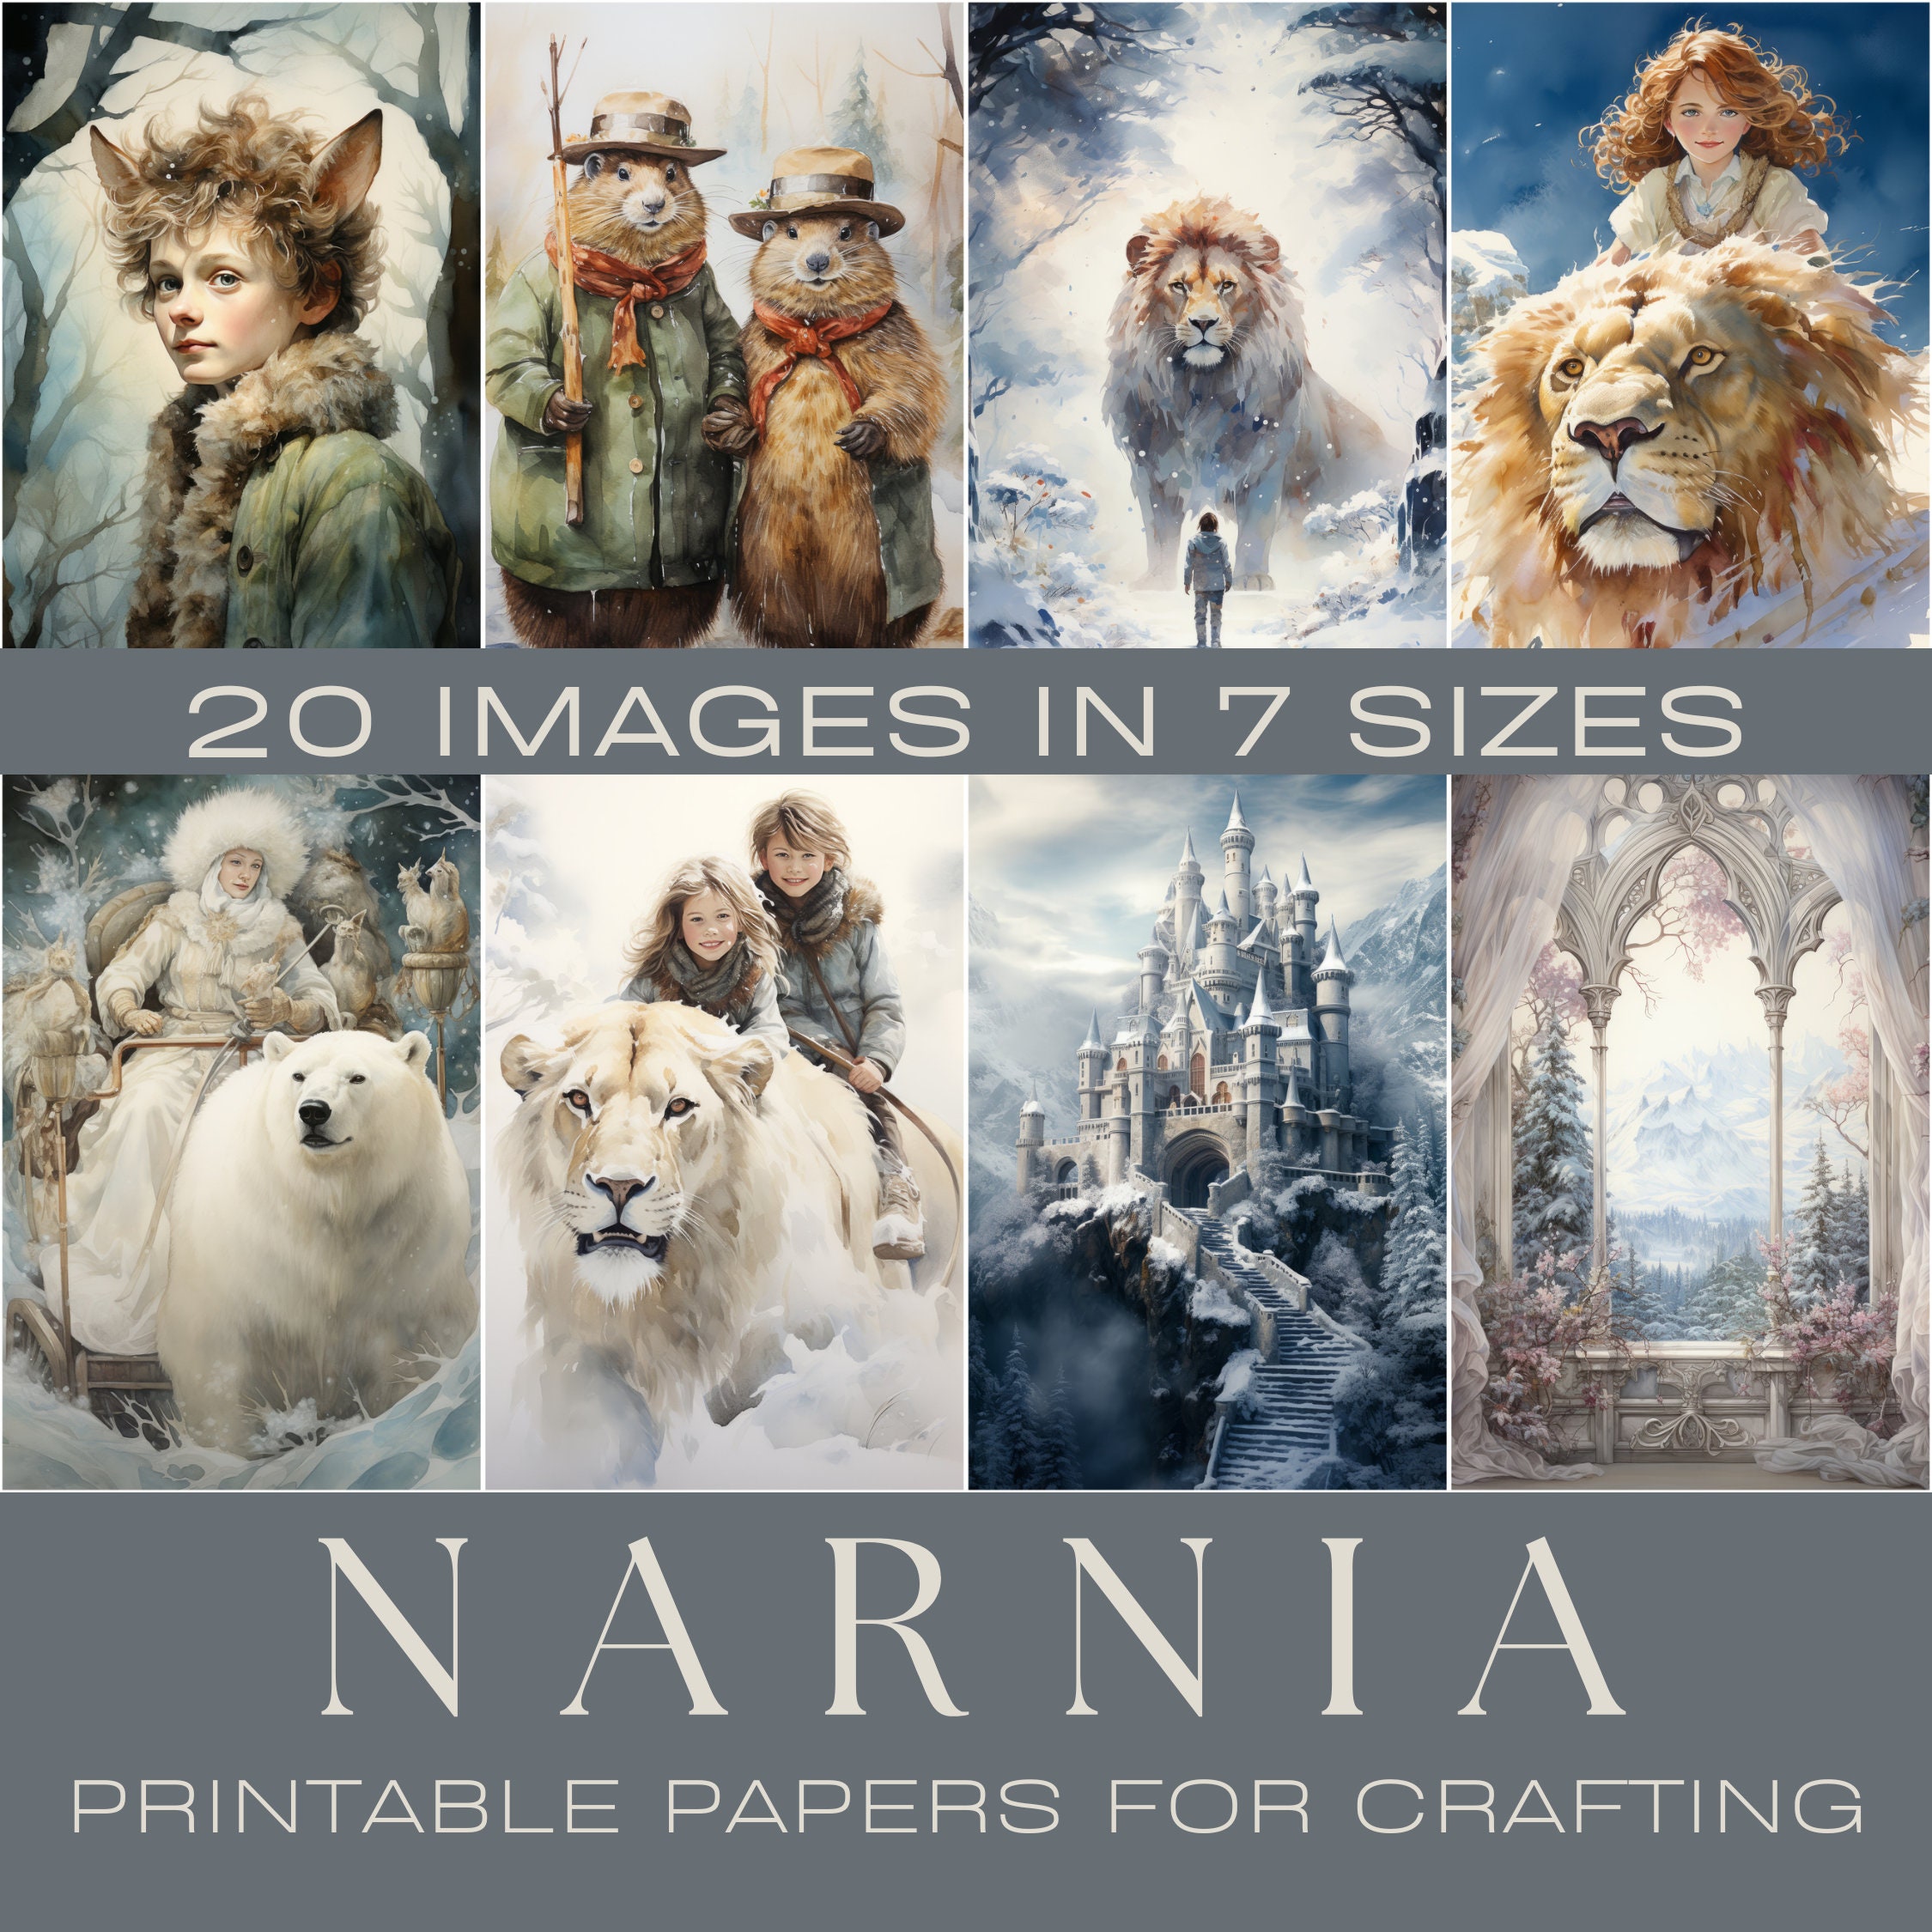 Couverture de carte Narnia, couverture Narnia en cuir, étui en cuir Kindle,  carte Narnia, couverture kobo forma narnia, coque Kindle Paperwhite 5,  couverture Kindle 11 -  France